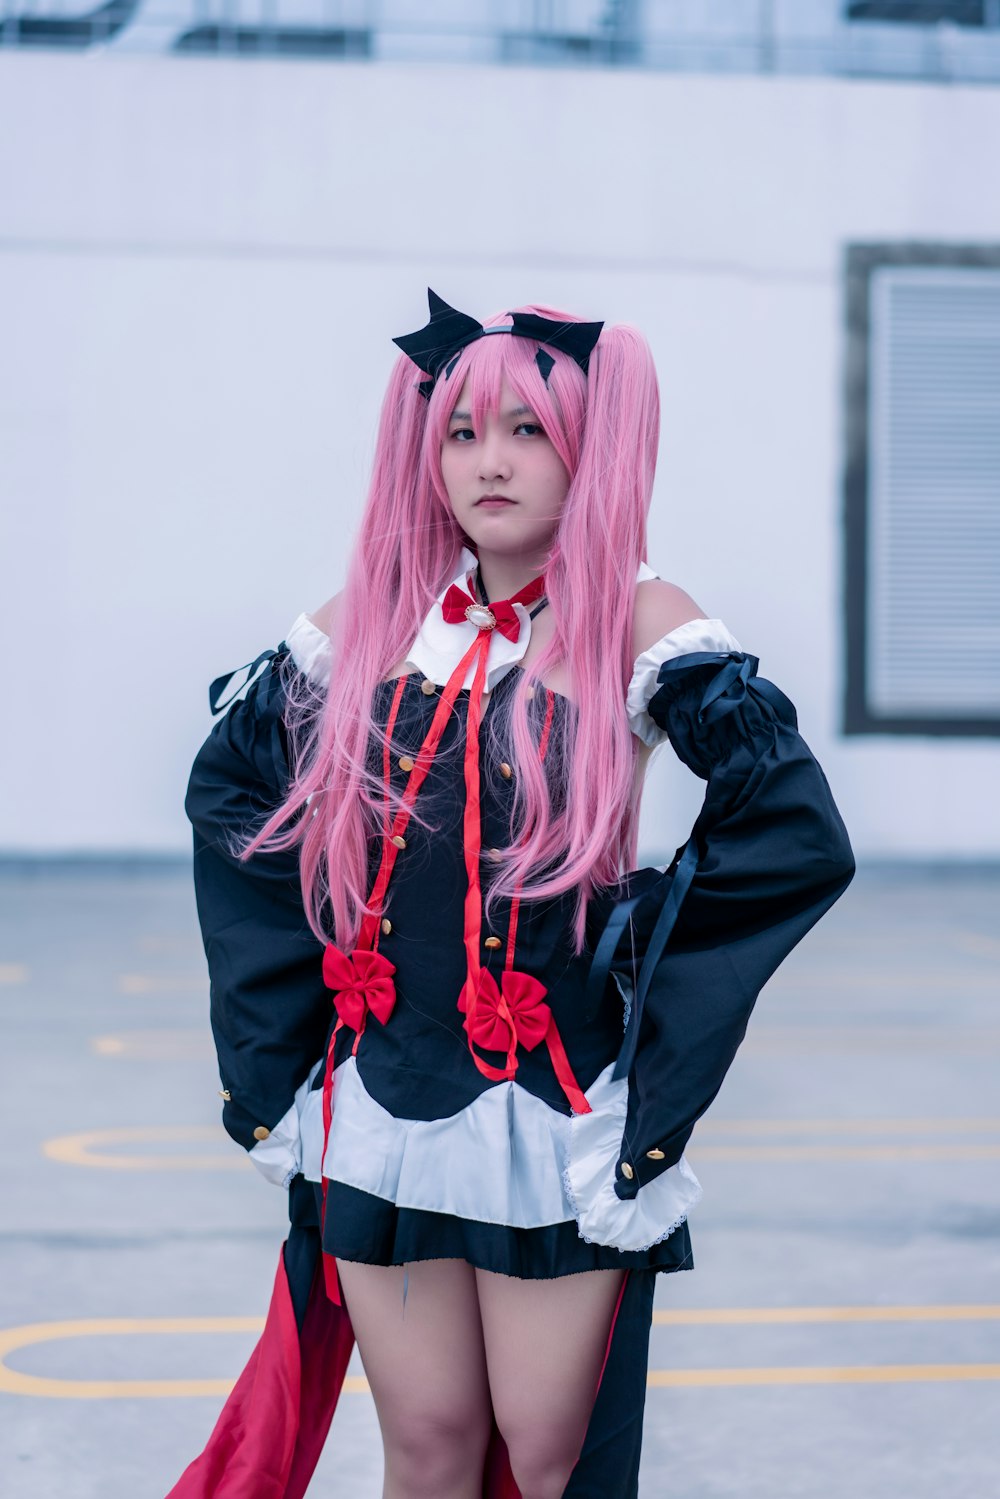 Anime Cosplay Pictures | Download Free Images on Unsplash